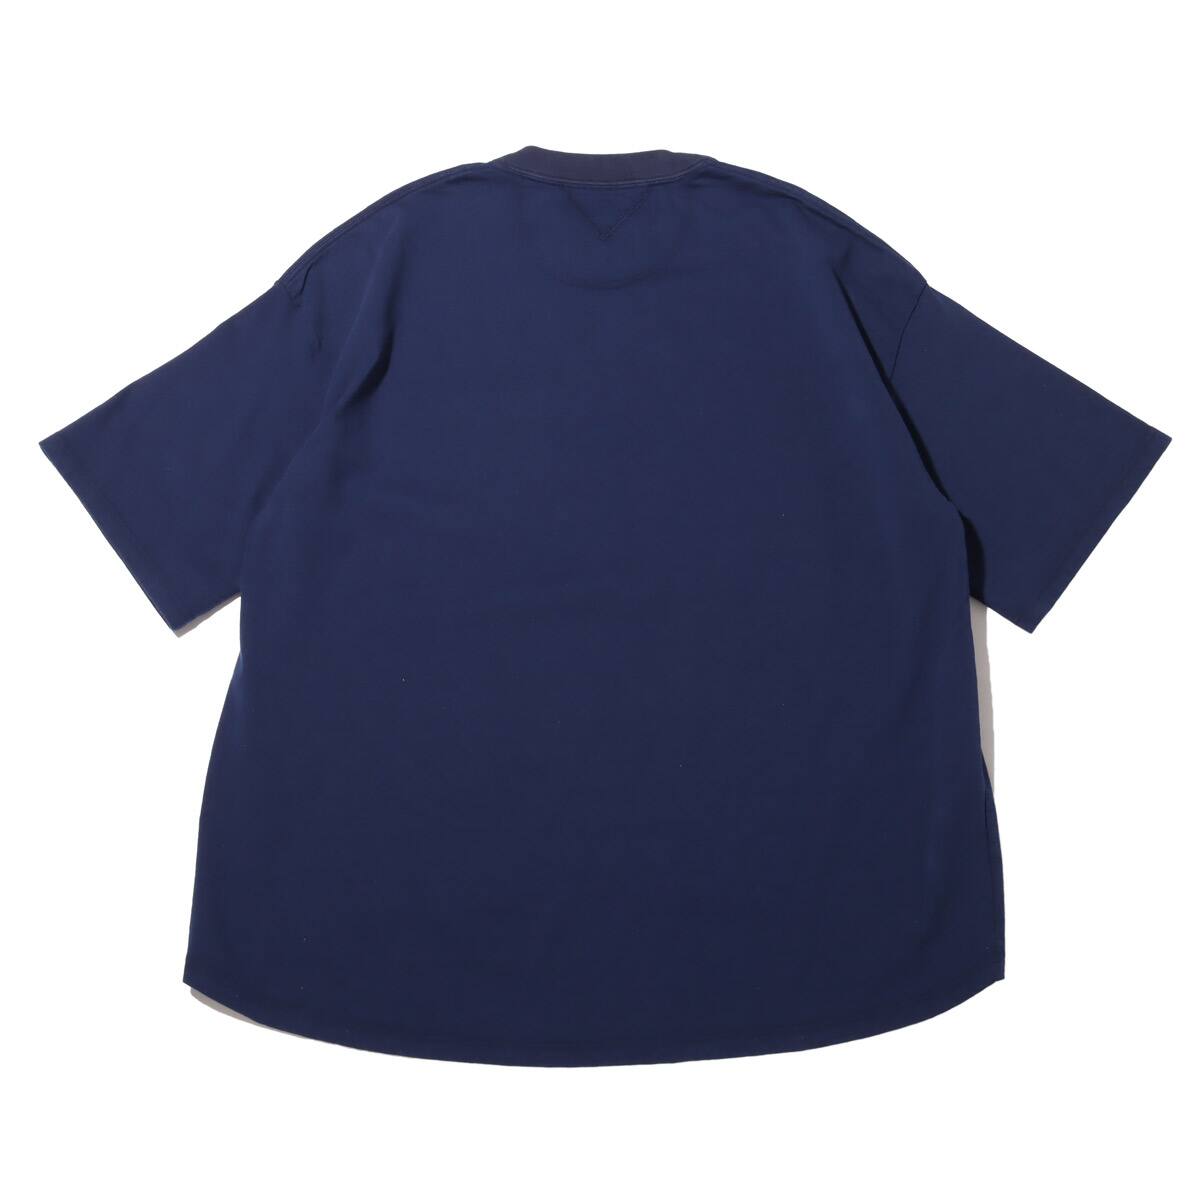 WHITE MOUNTAINEERING WIDE ASYMMETRY T-SHIRT NAVY 